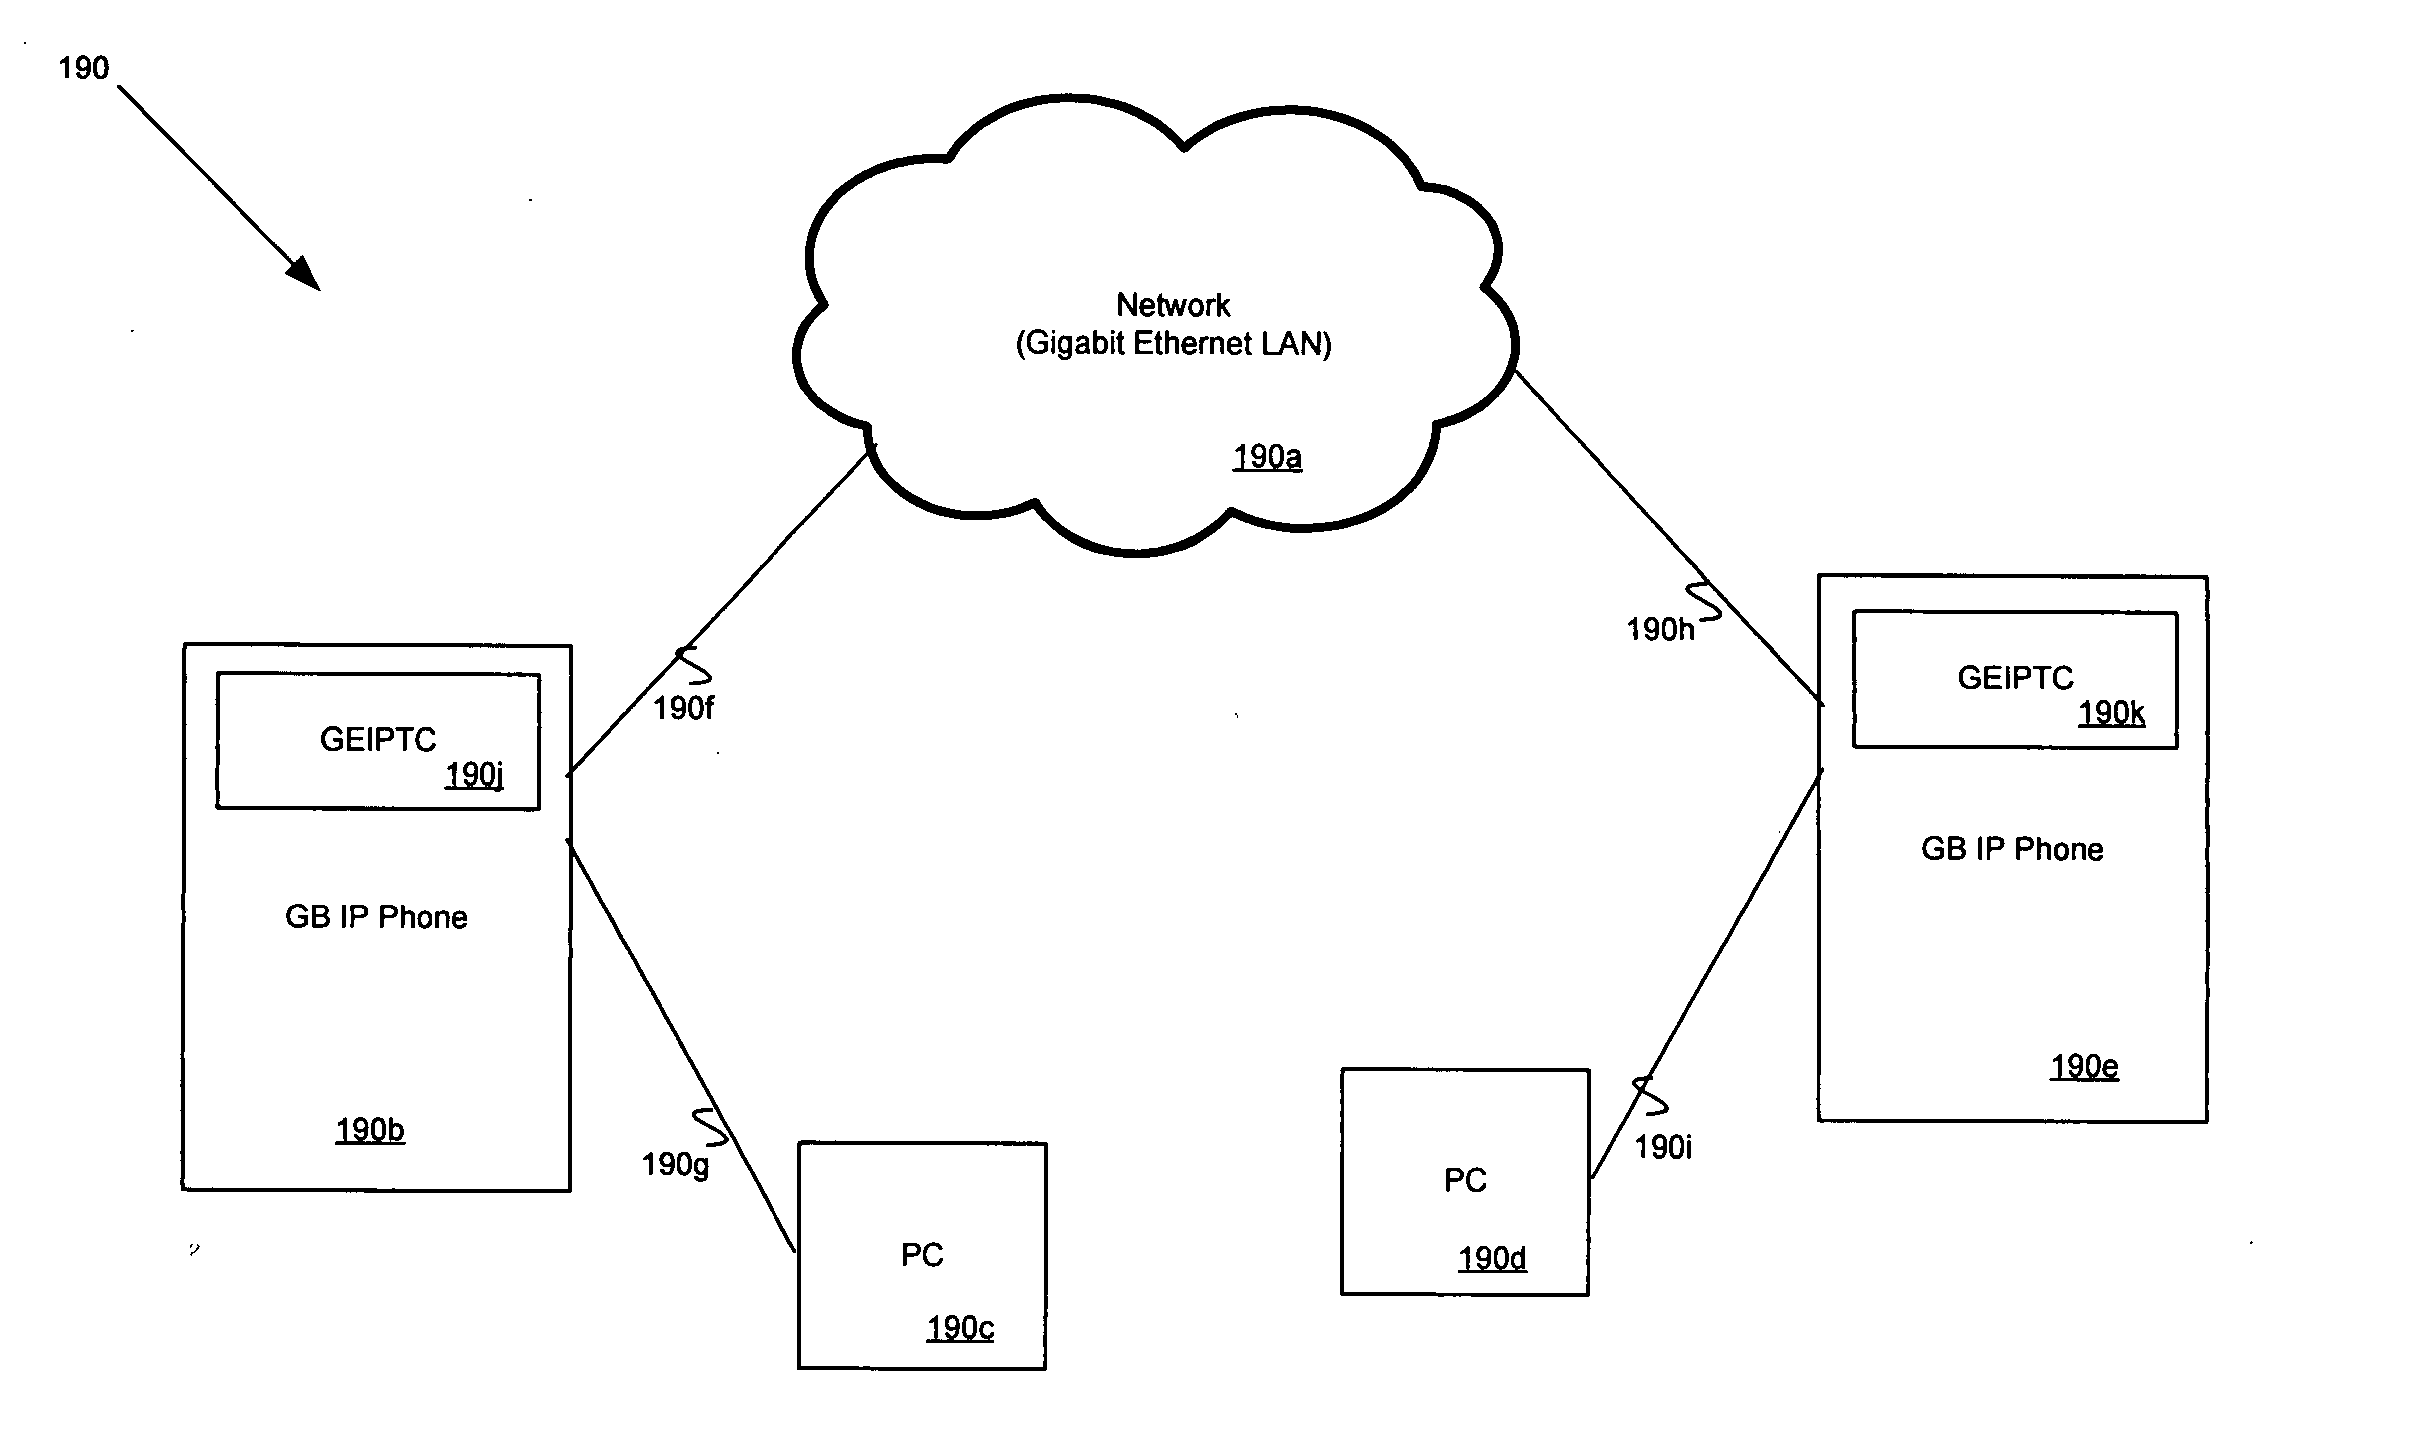 Method and system for a gigabit Ethernet IP telephone chip with no DSP core, which uses a RISC core with instruction extensions to support voice processing